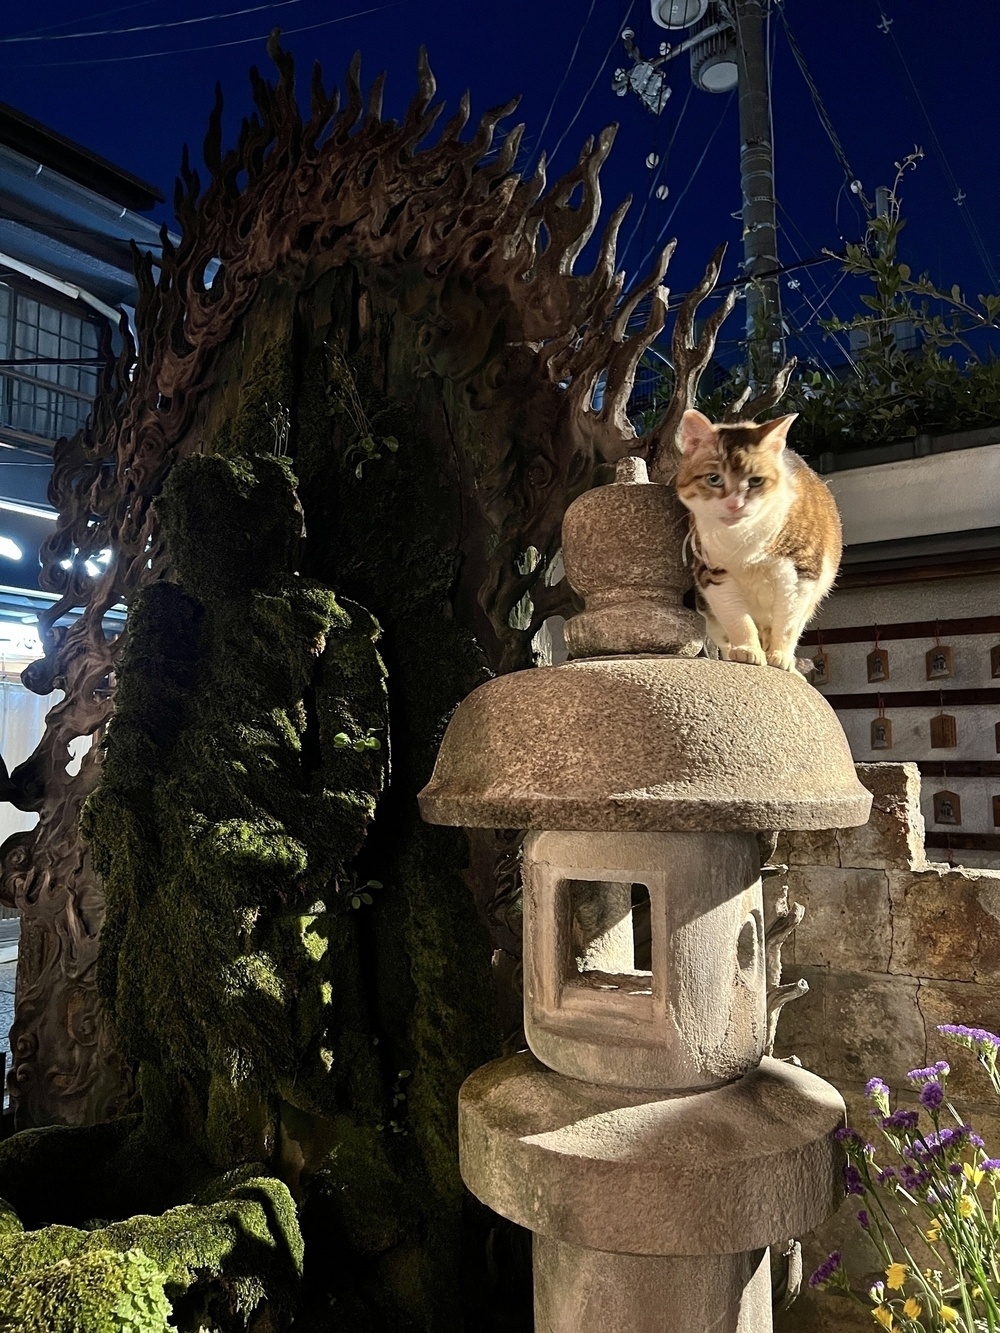 Cat sits on a stone lantern. Behind him is a statue of Fudō Myoō completely covered in moss